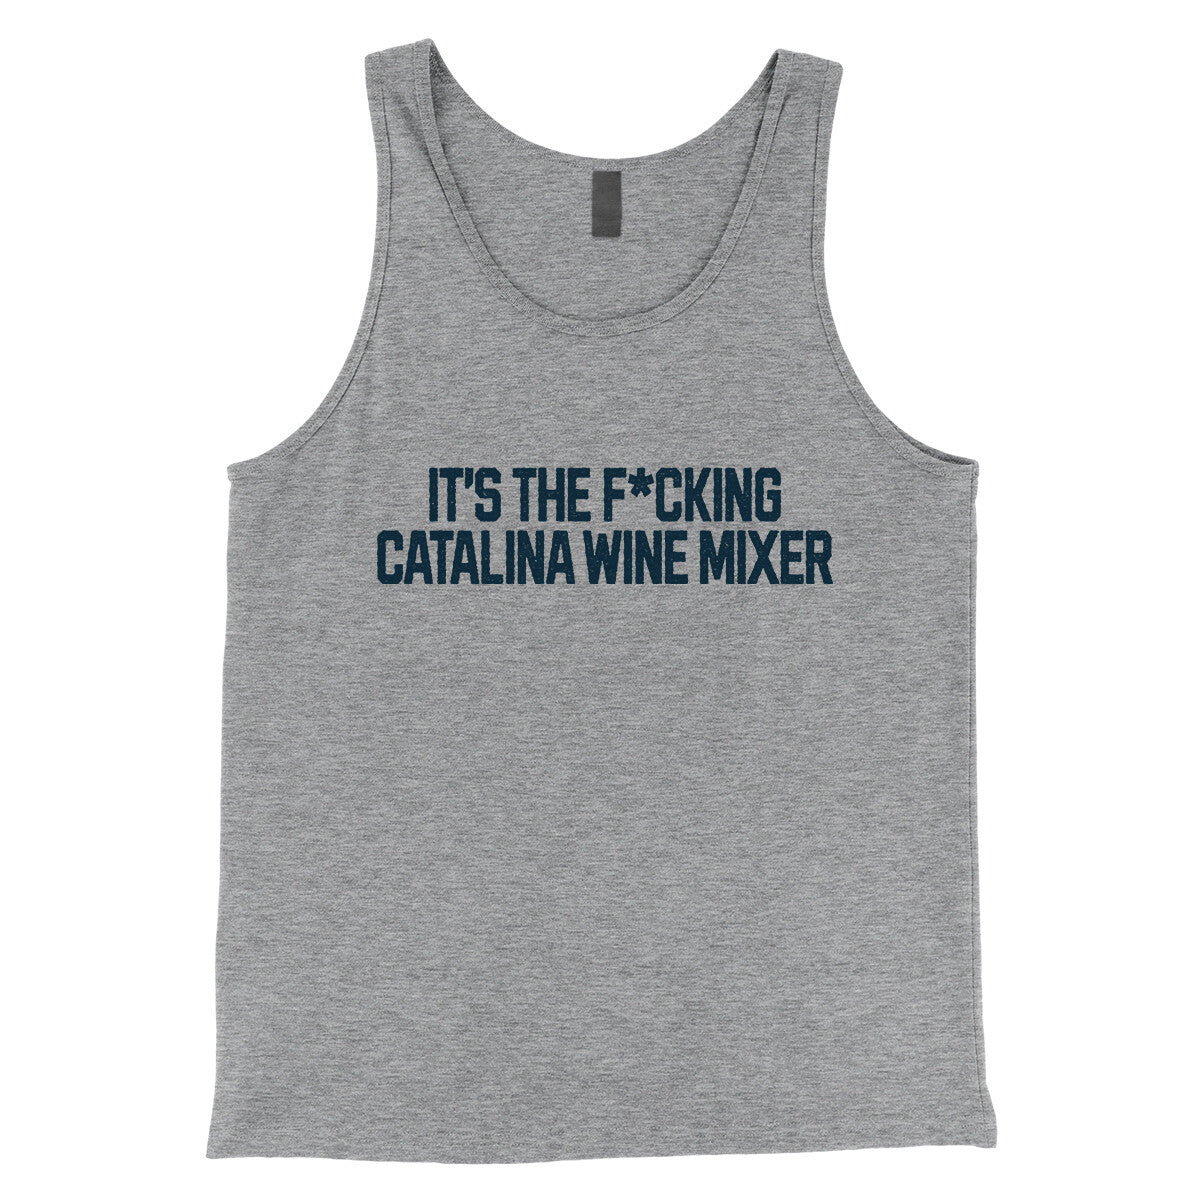 It's the Fucking Catalina Wine Mixer in Athletic Heather Color